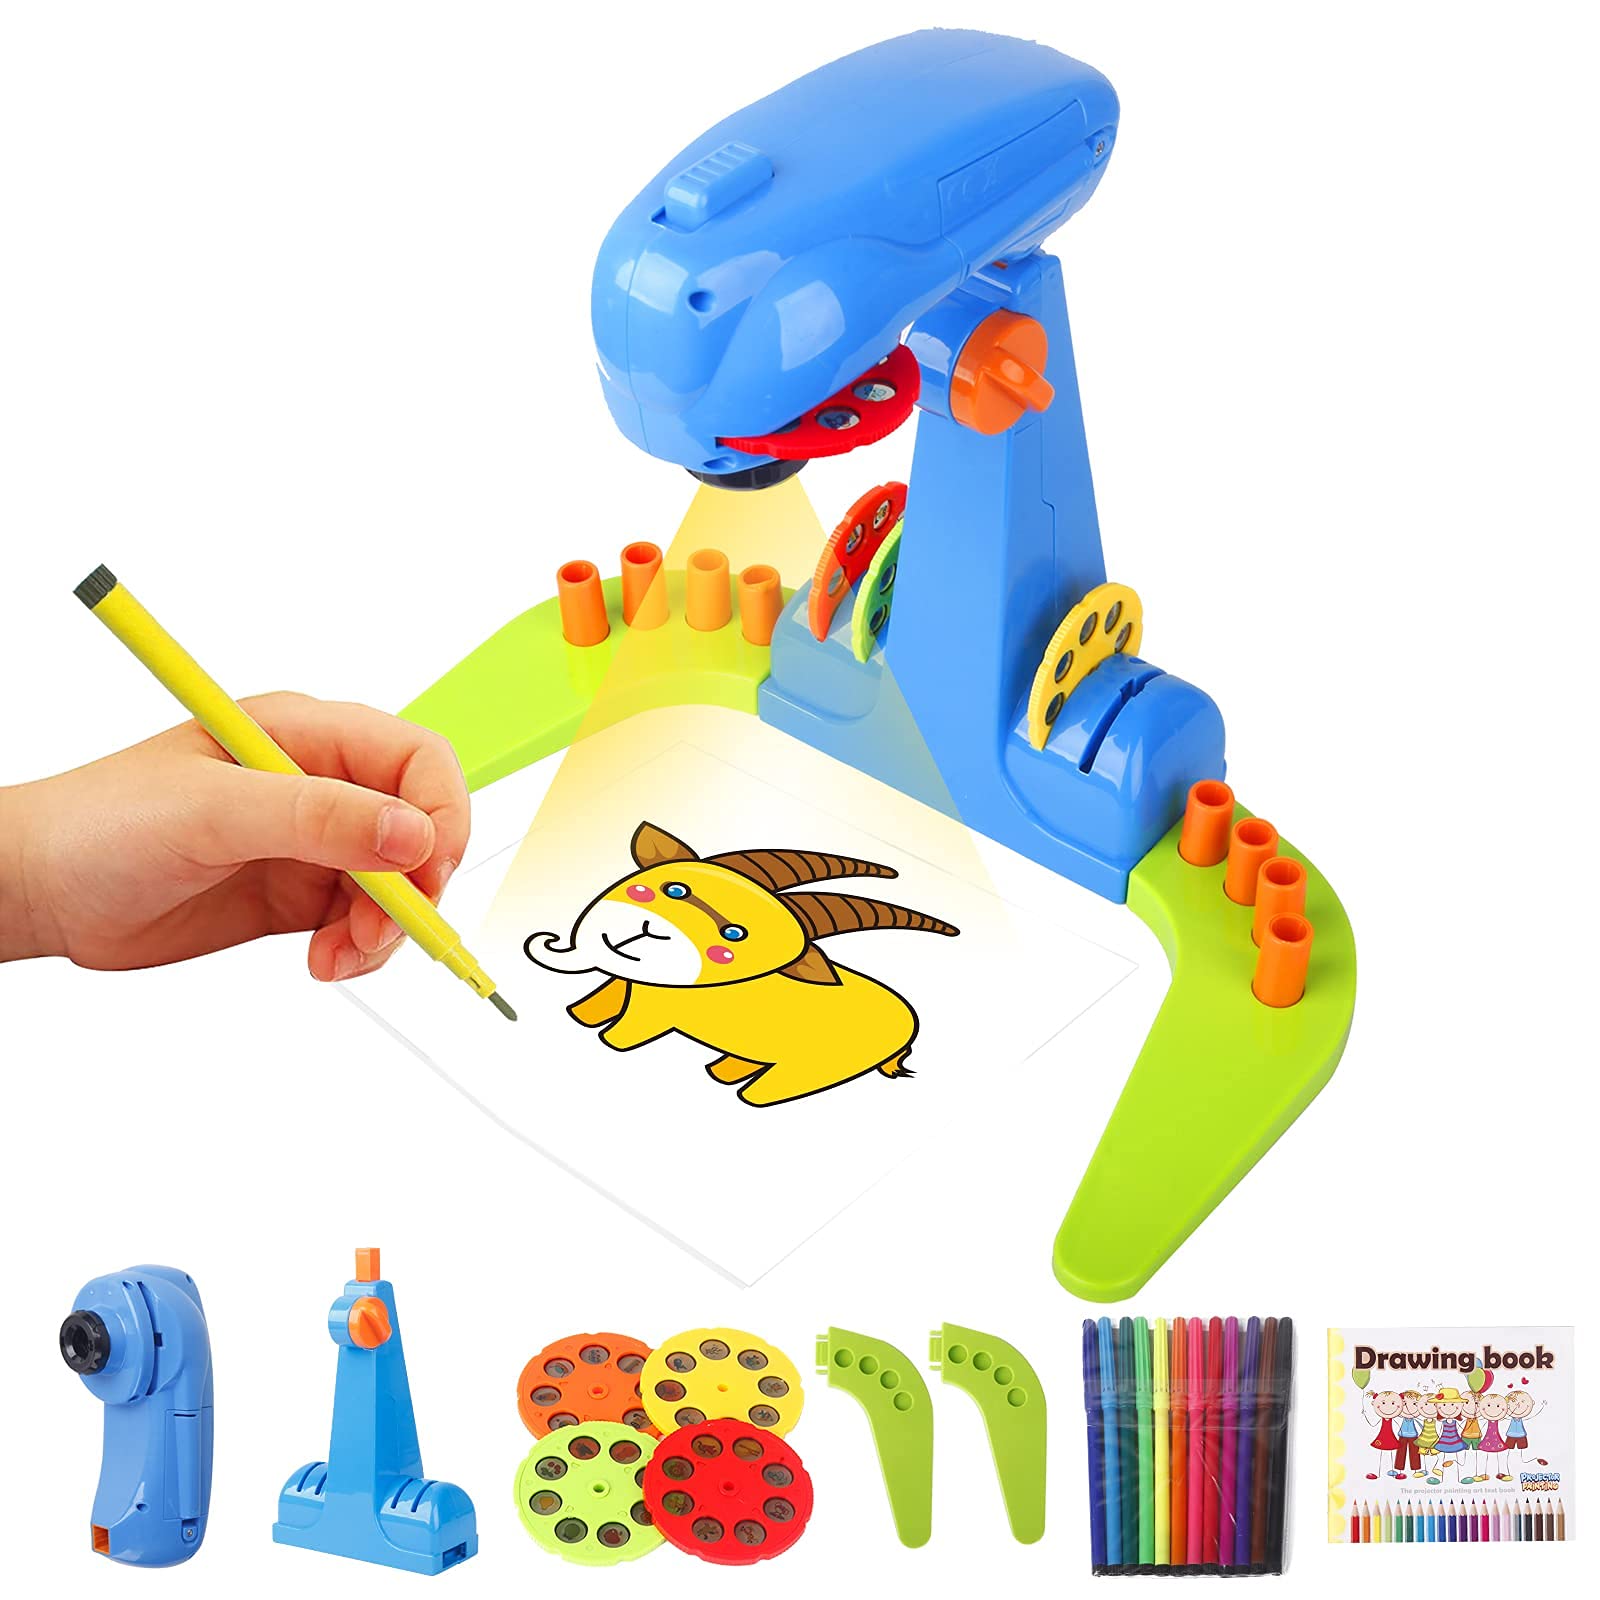 Drawing Projector Table for Kids - Blue Trace and UAE